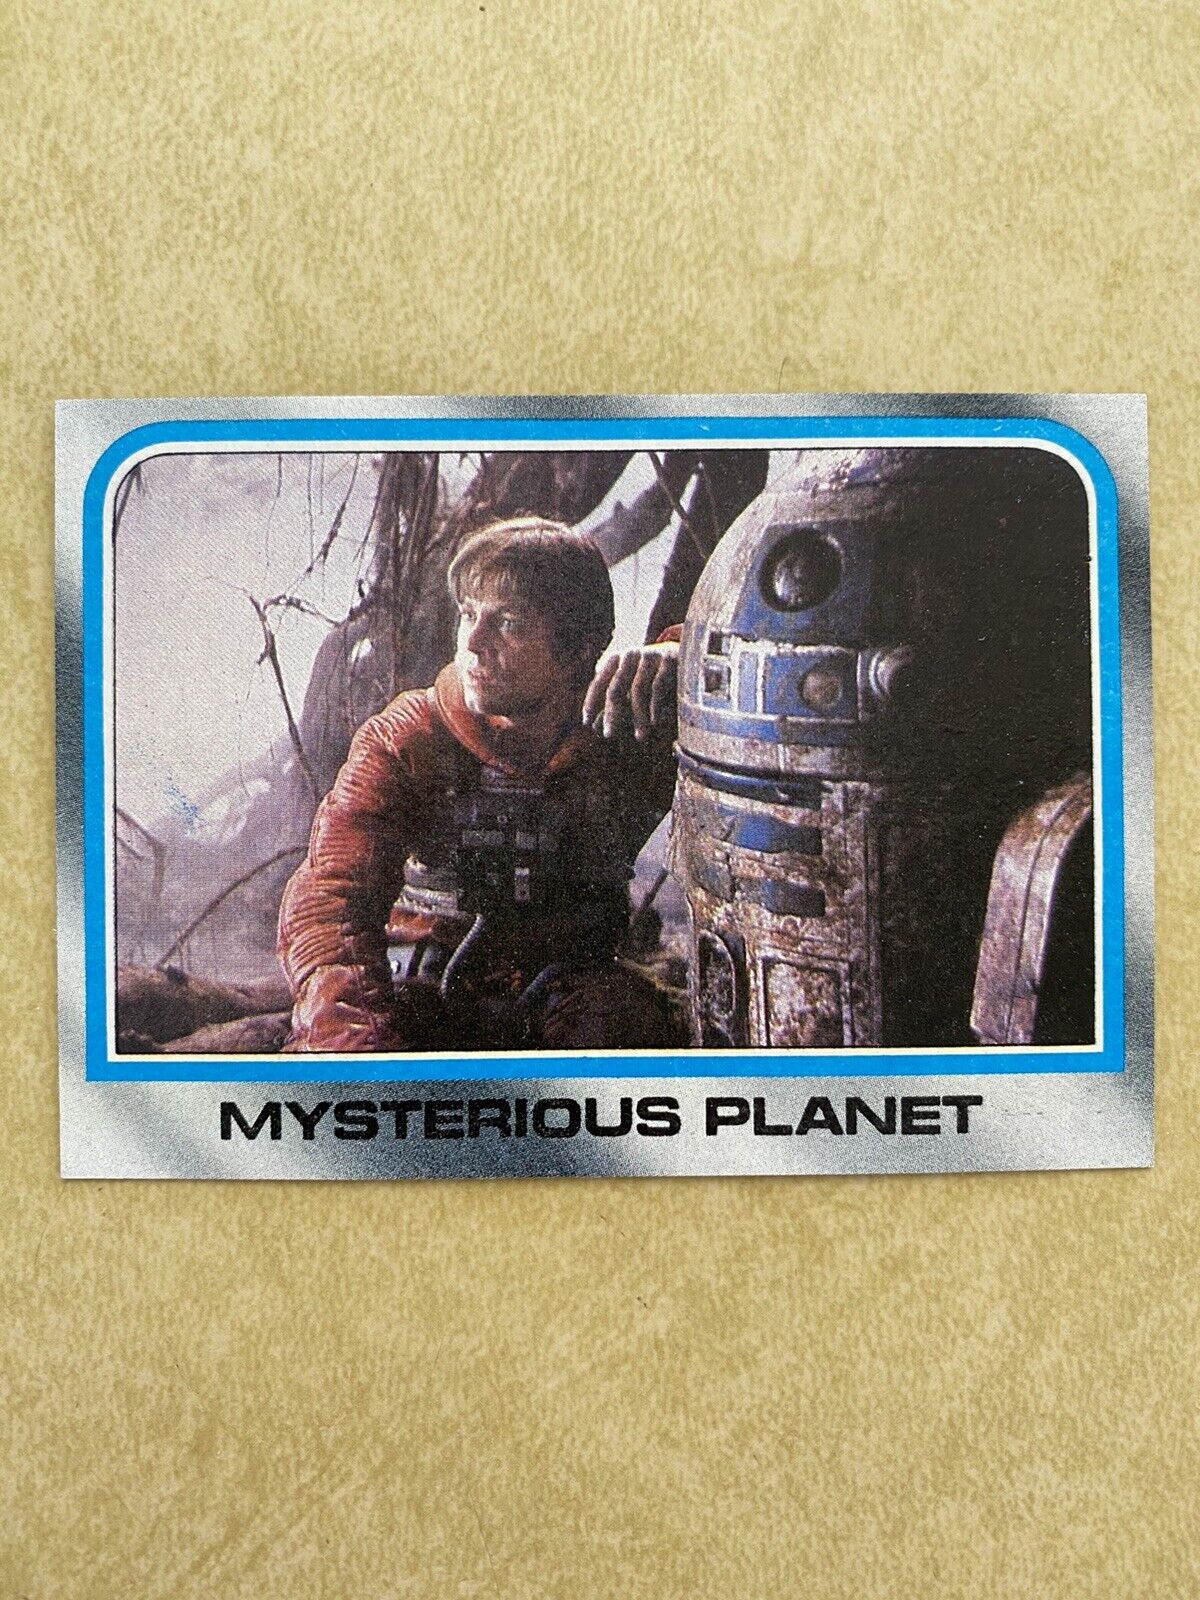 1980 Topps The Empire Strikes Back #175 -Mysterious Planet -IMMACULATE-SHARP